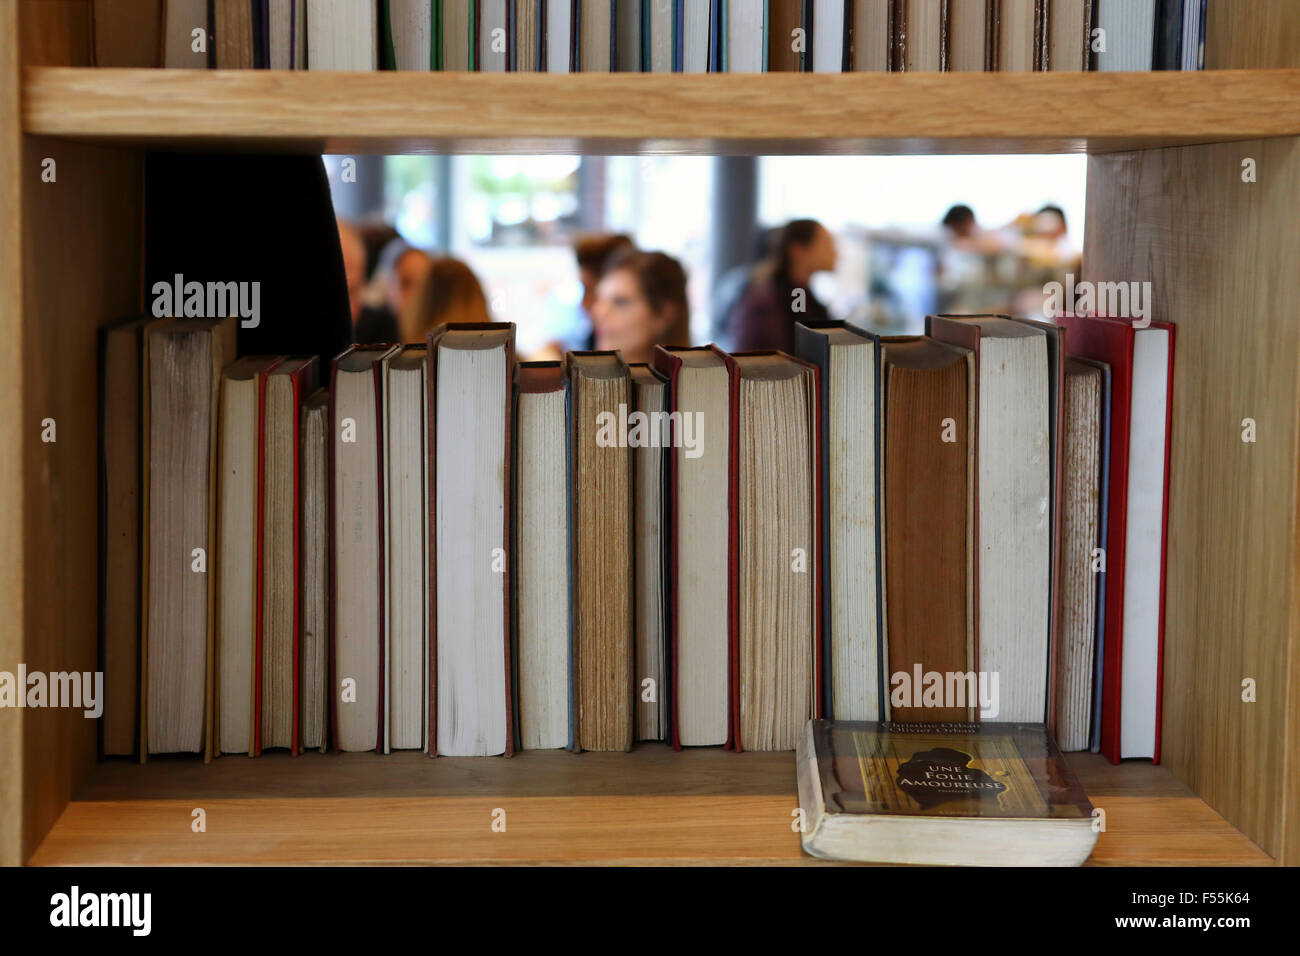 books in a bookshelf with out of focus people in the background Stock Photo